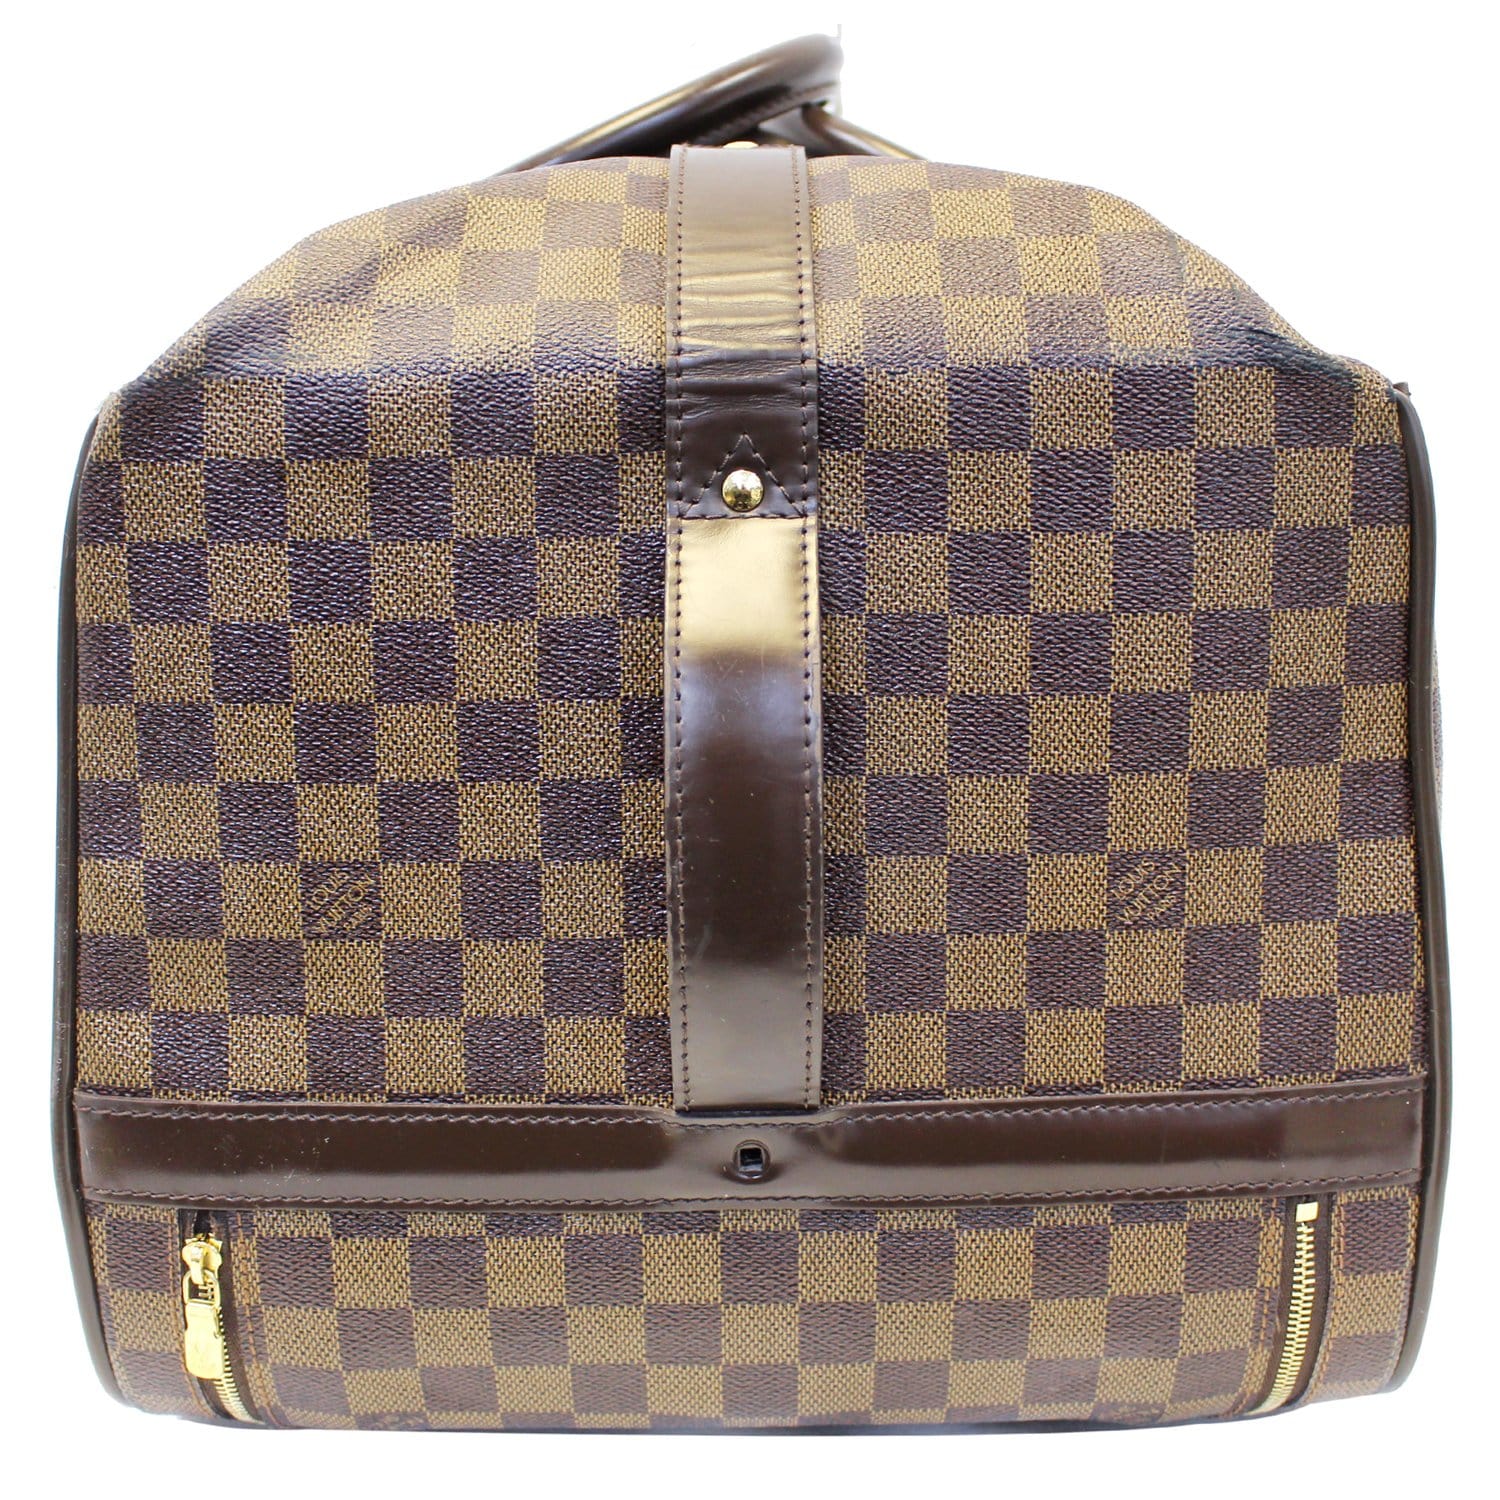 Louis Vuitton Eole 50 Rolling Suitcase 2008 Second Hand, 48% OFF